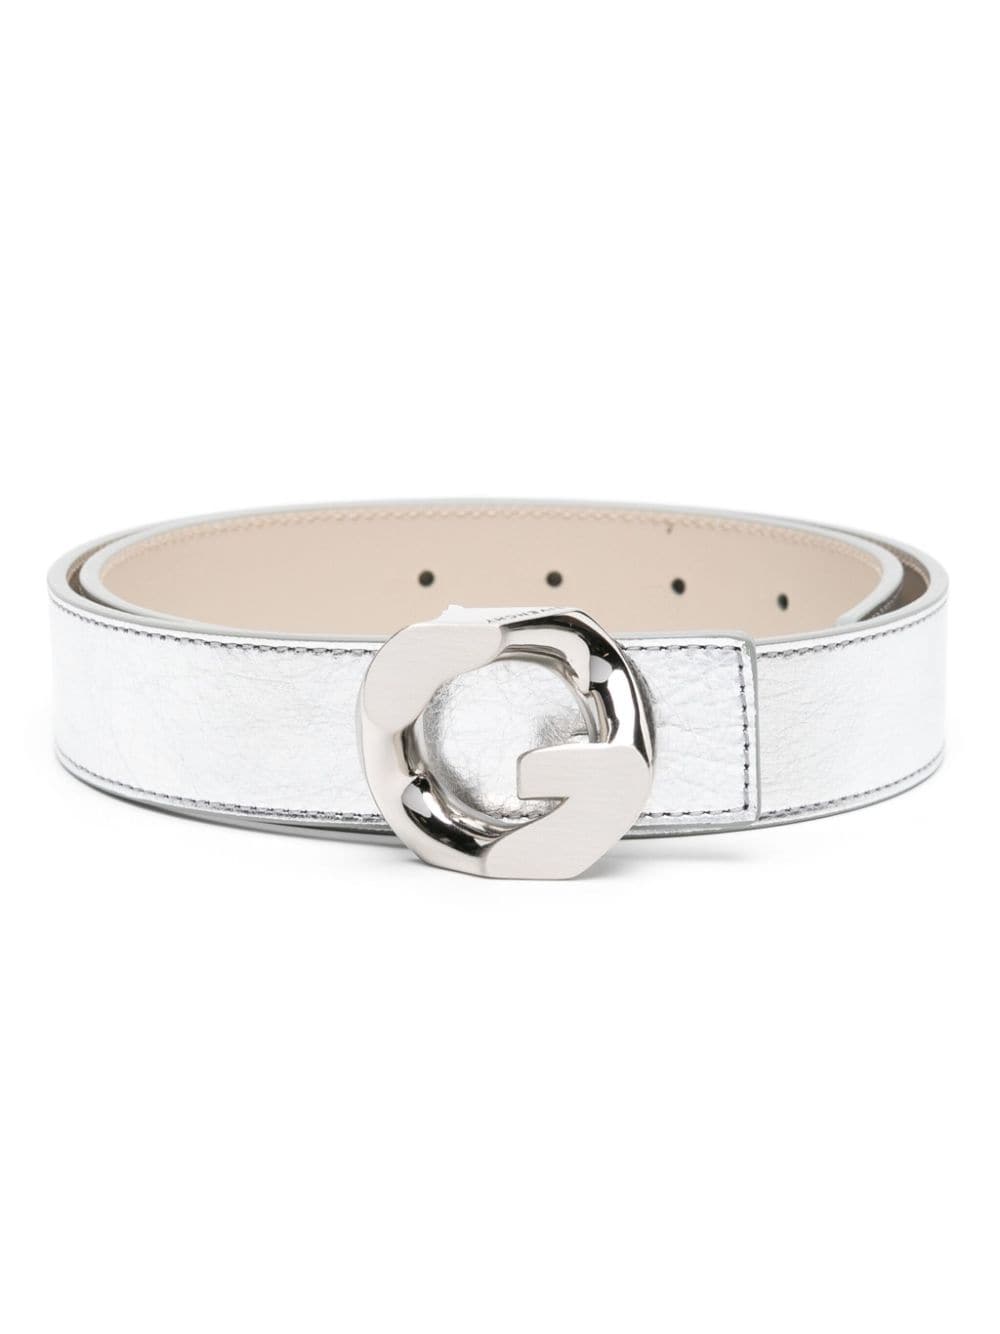 G-Chain buckle leather belt